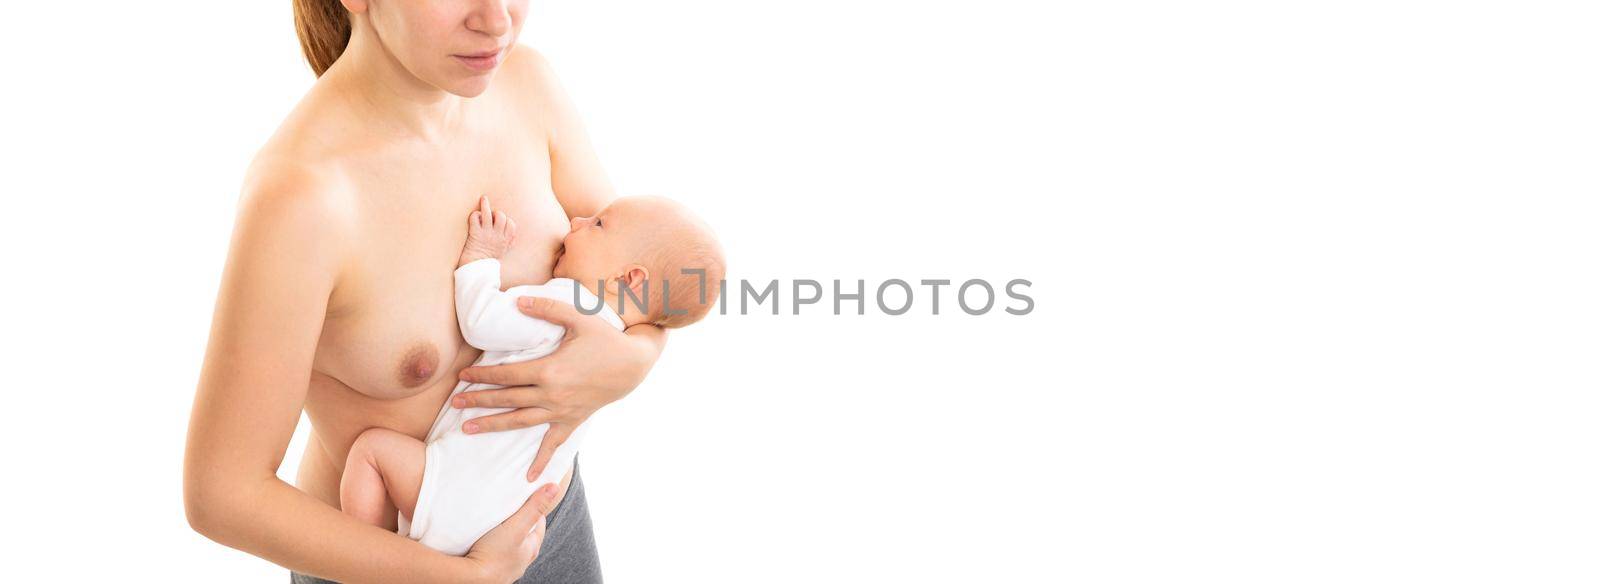 newborn takes mother's breast drinking milk on a white background.